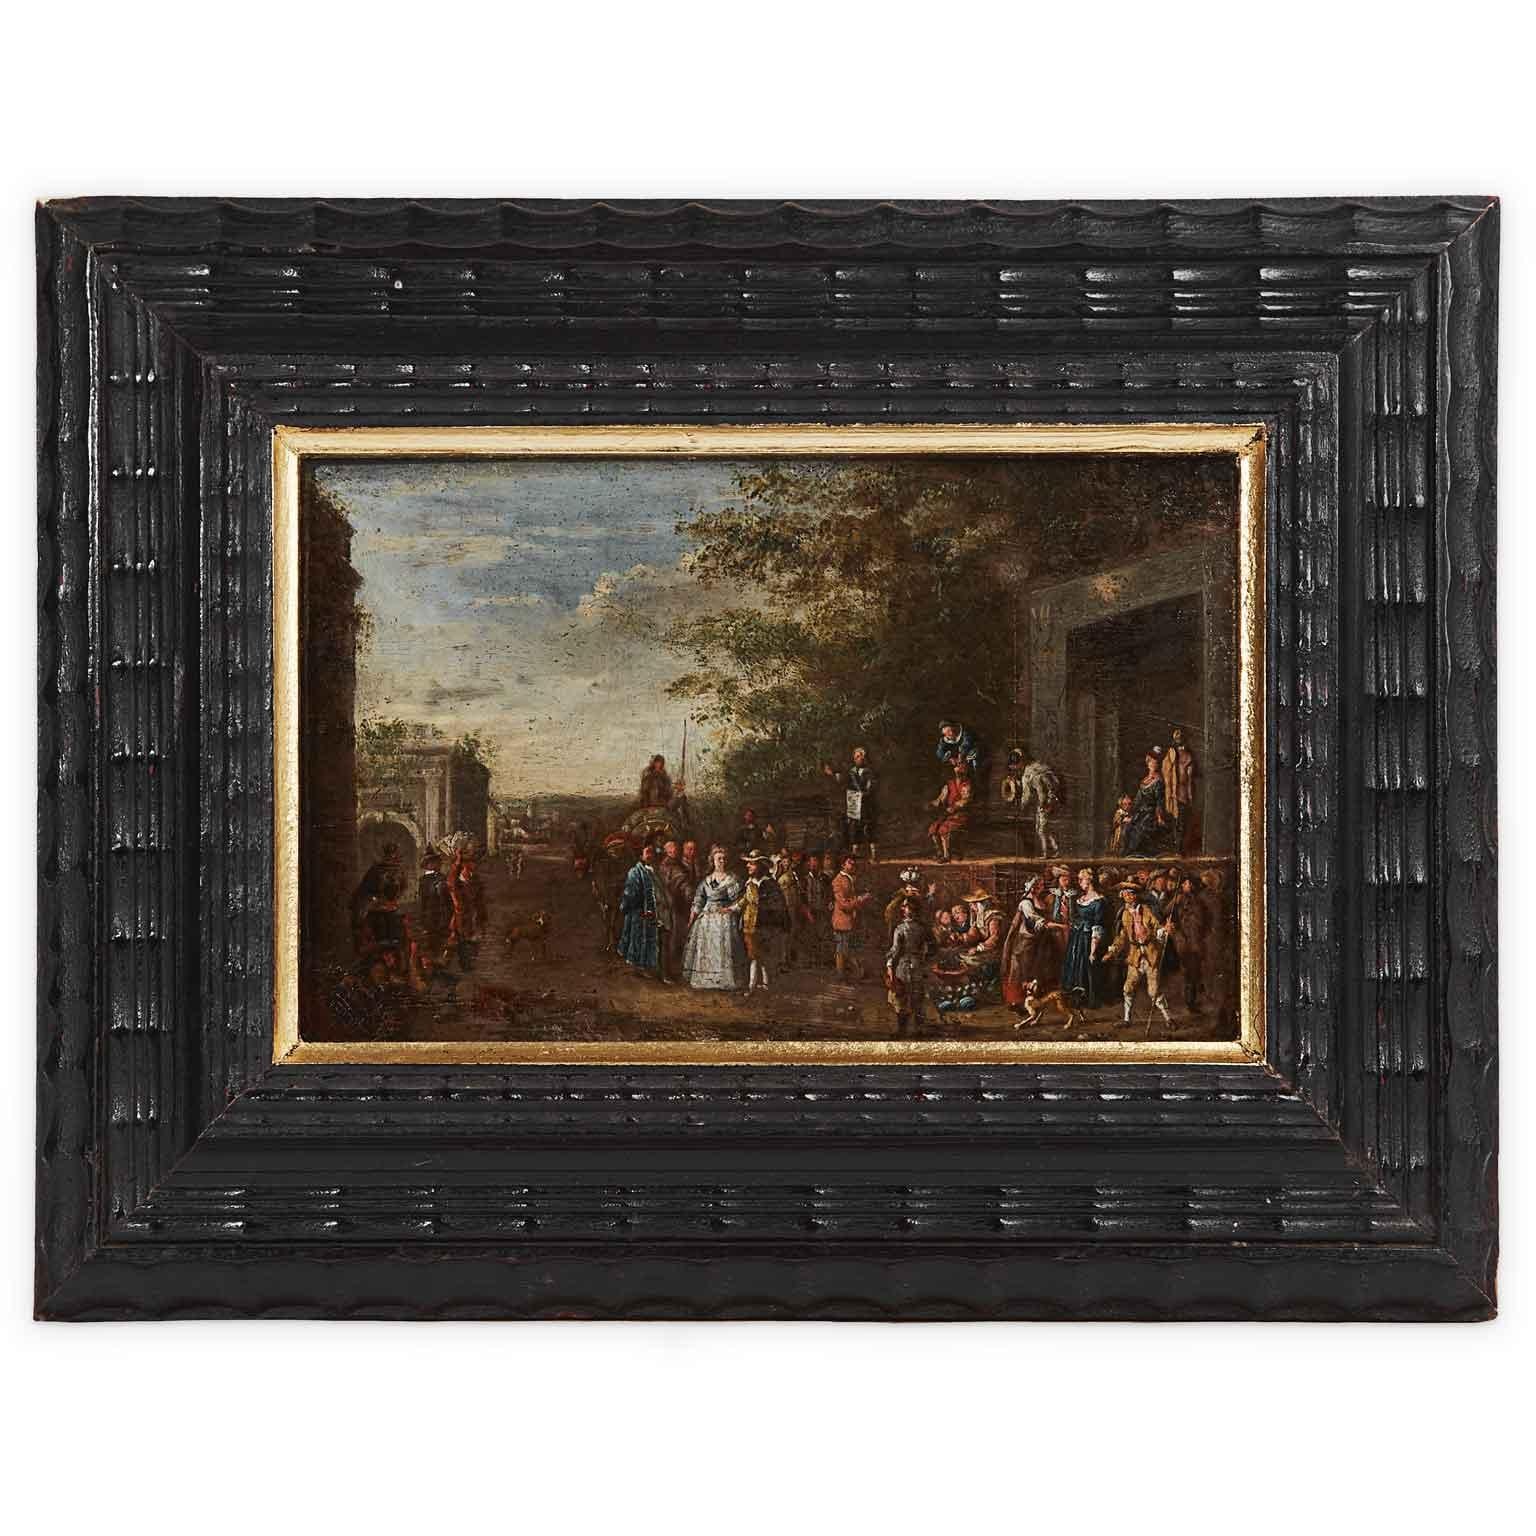 17th century Old Master Flemish School oil on copper painting depicting a picturesque Scene from the Commedia dell'Arte, scenery crowded with a multitude of figures in the foreground with classical architecture and landscape in the background. On